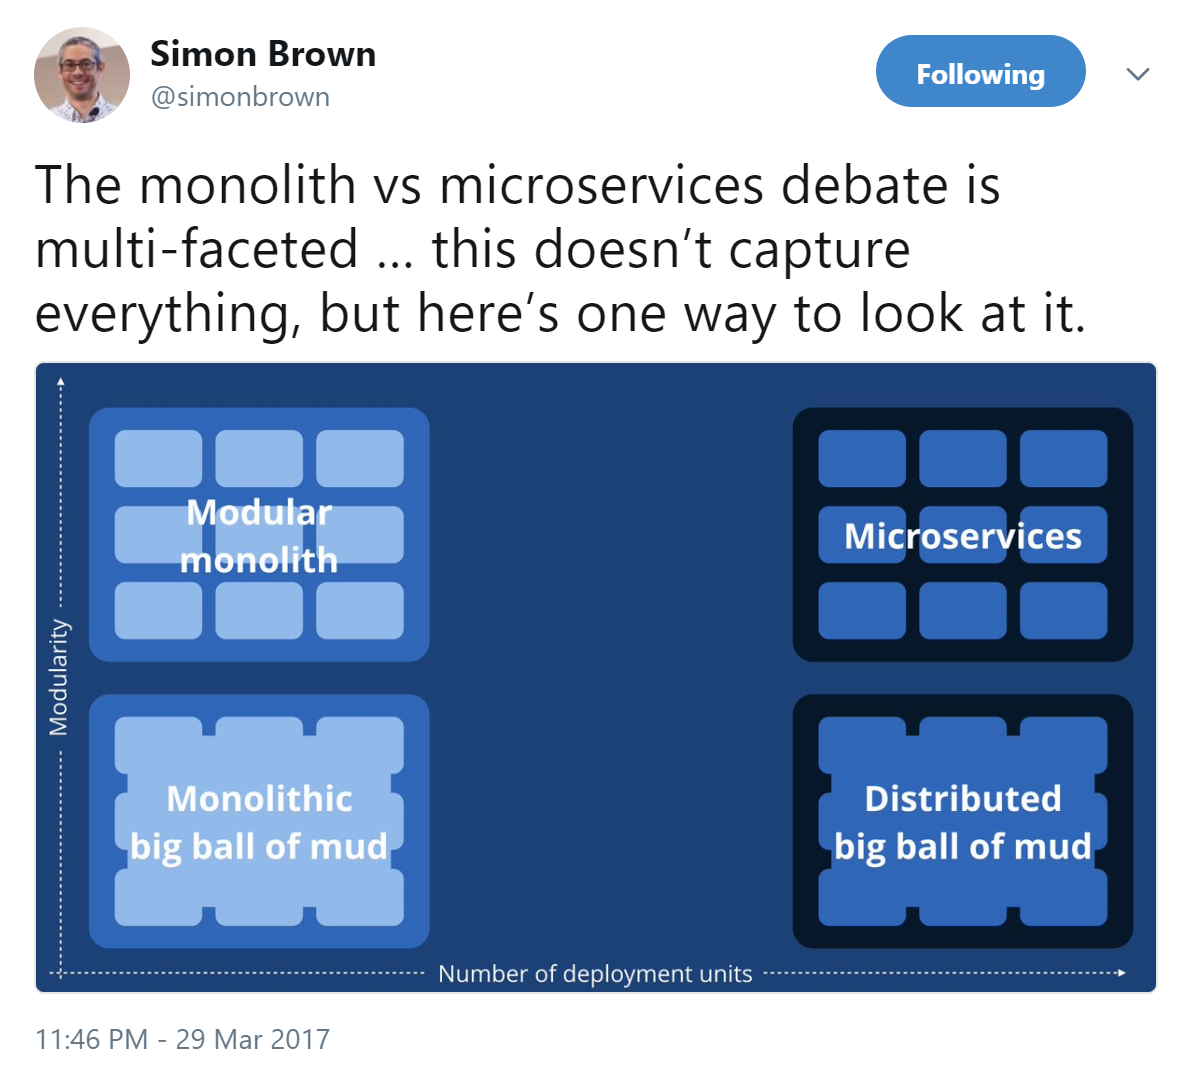 Monolith versus Microservices, with modular monolith and distributed monolith